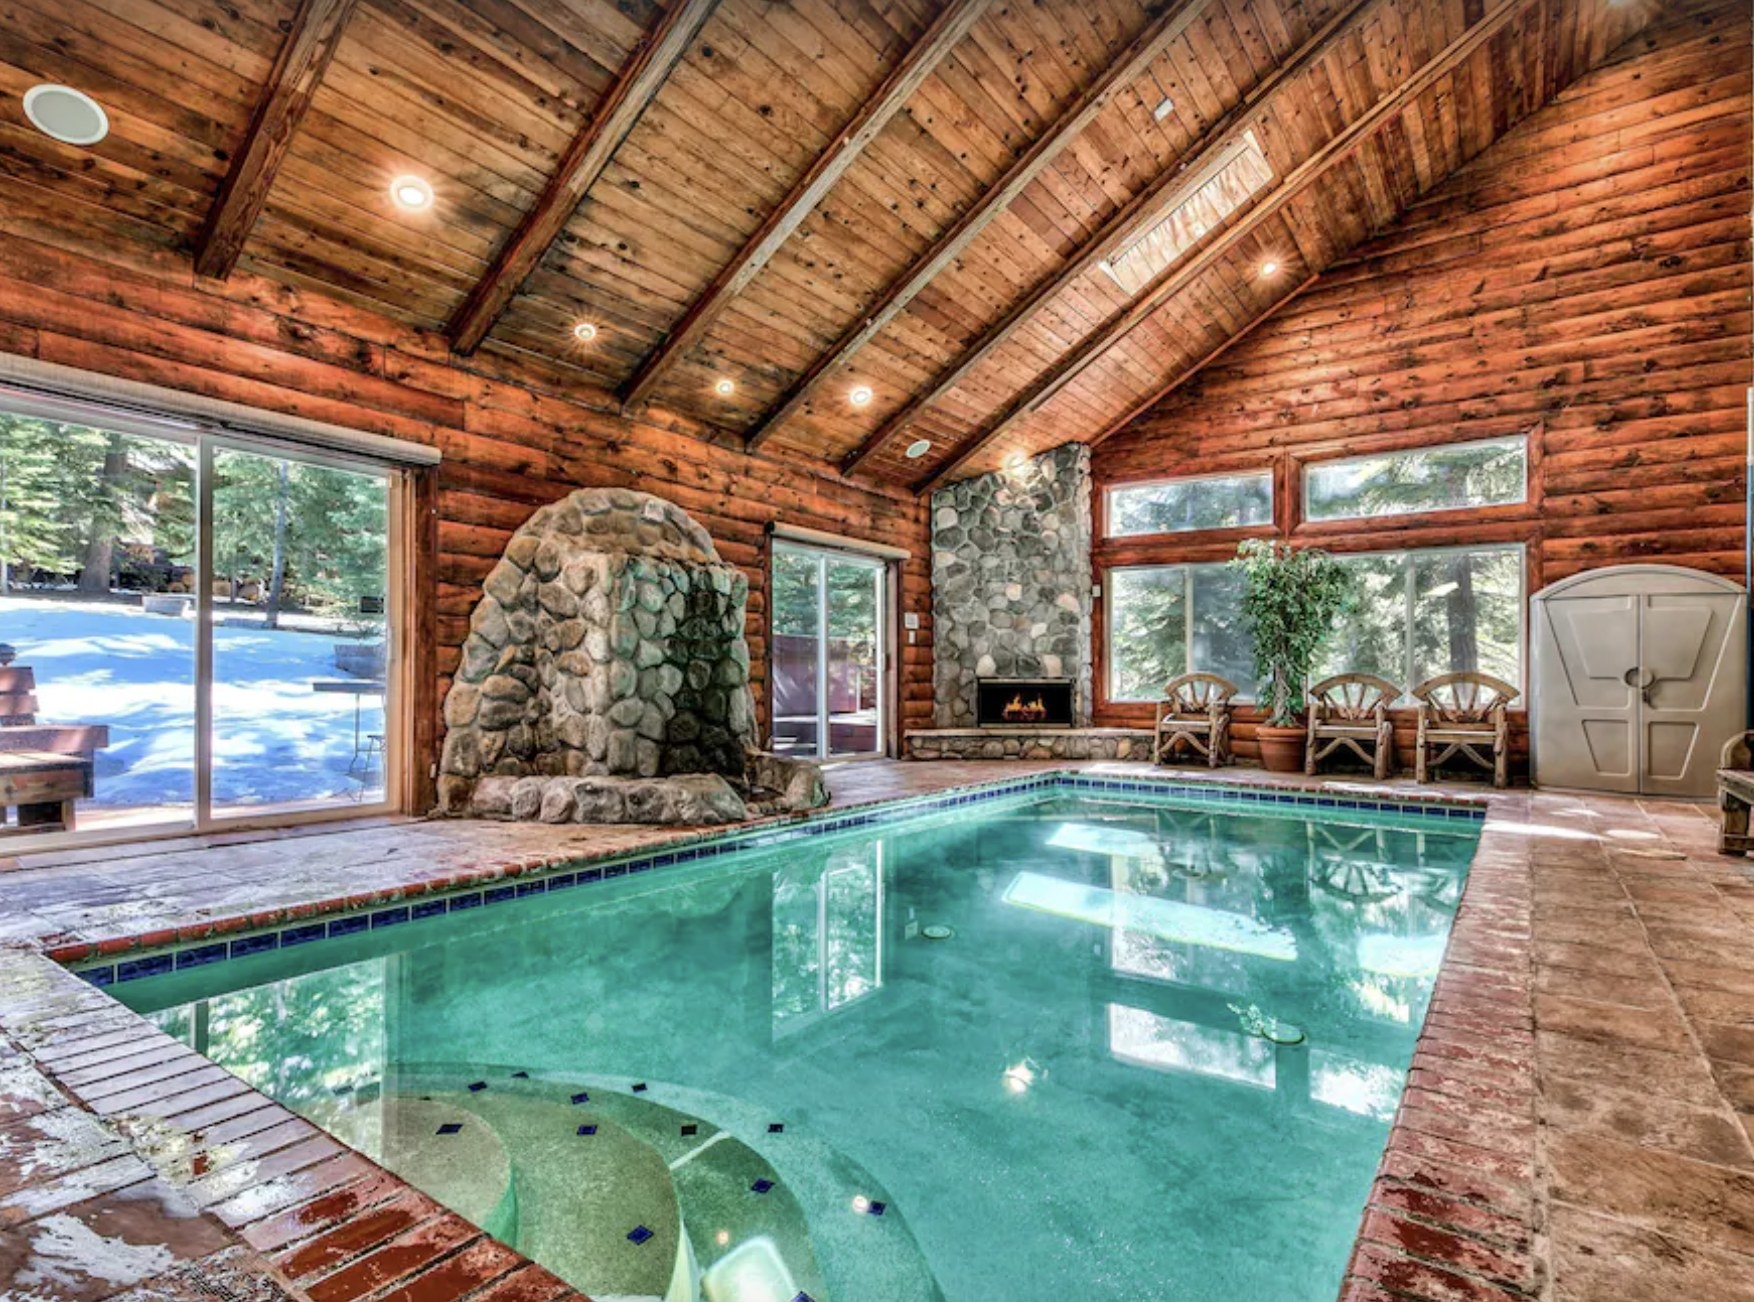 Indoor pool in a cabin